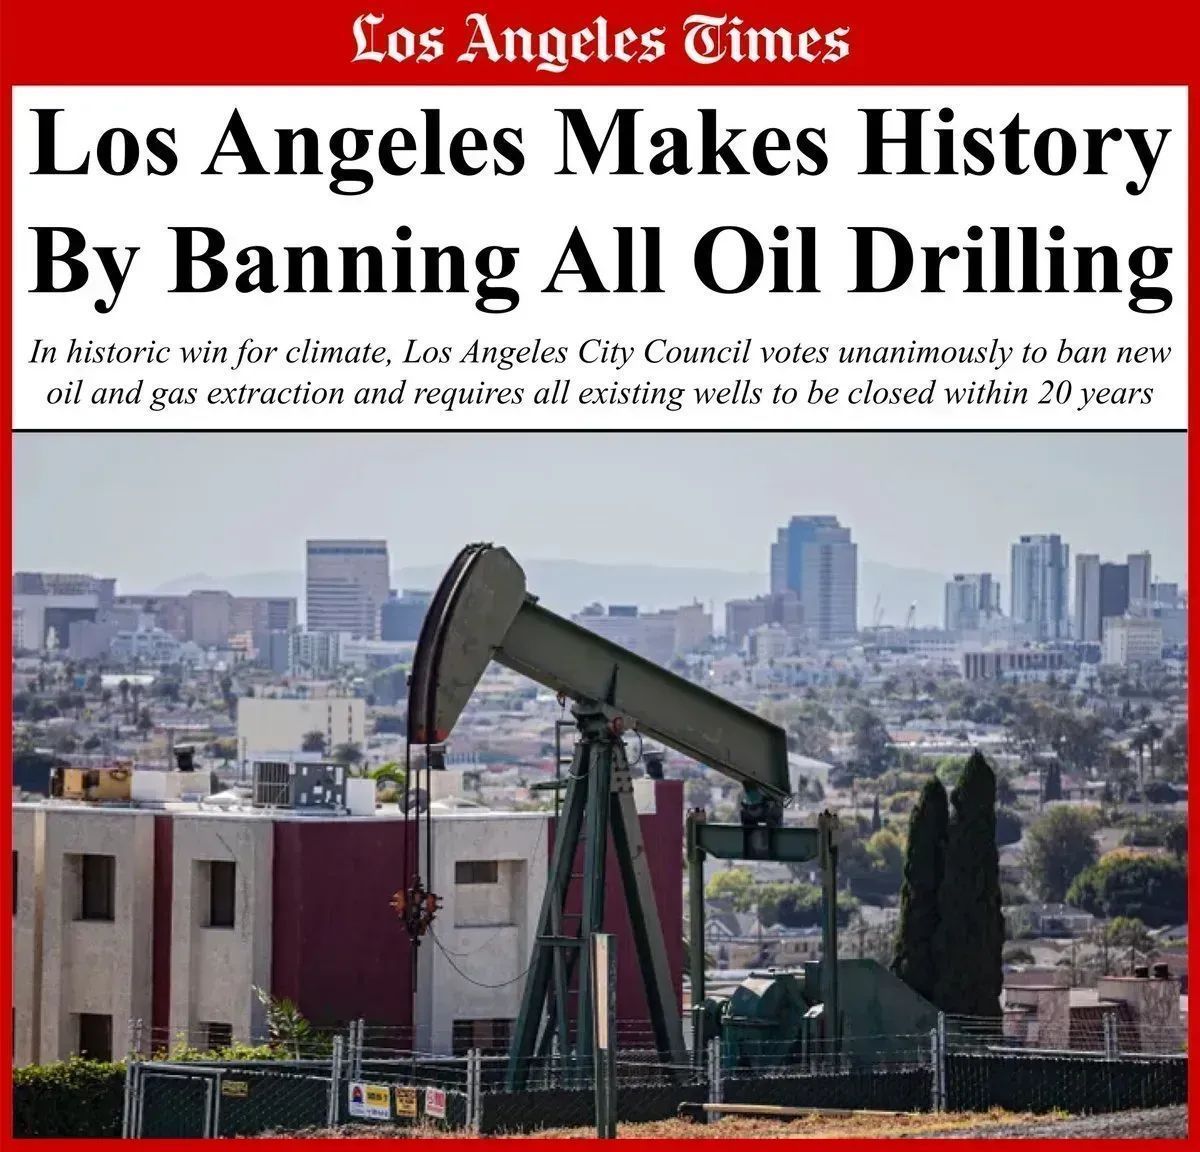 Los Angeles voted 12-0 to ban new drilling and to close all 5,000 existing oil and gas wells in the city. This is a historic victory by @STAND_LA and all citizens over the oil industry and environmental racism. IT CAN BE DONE! Who's next? #ActOnClimate #climate